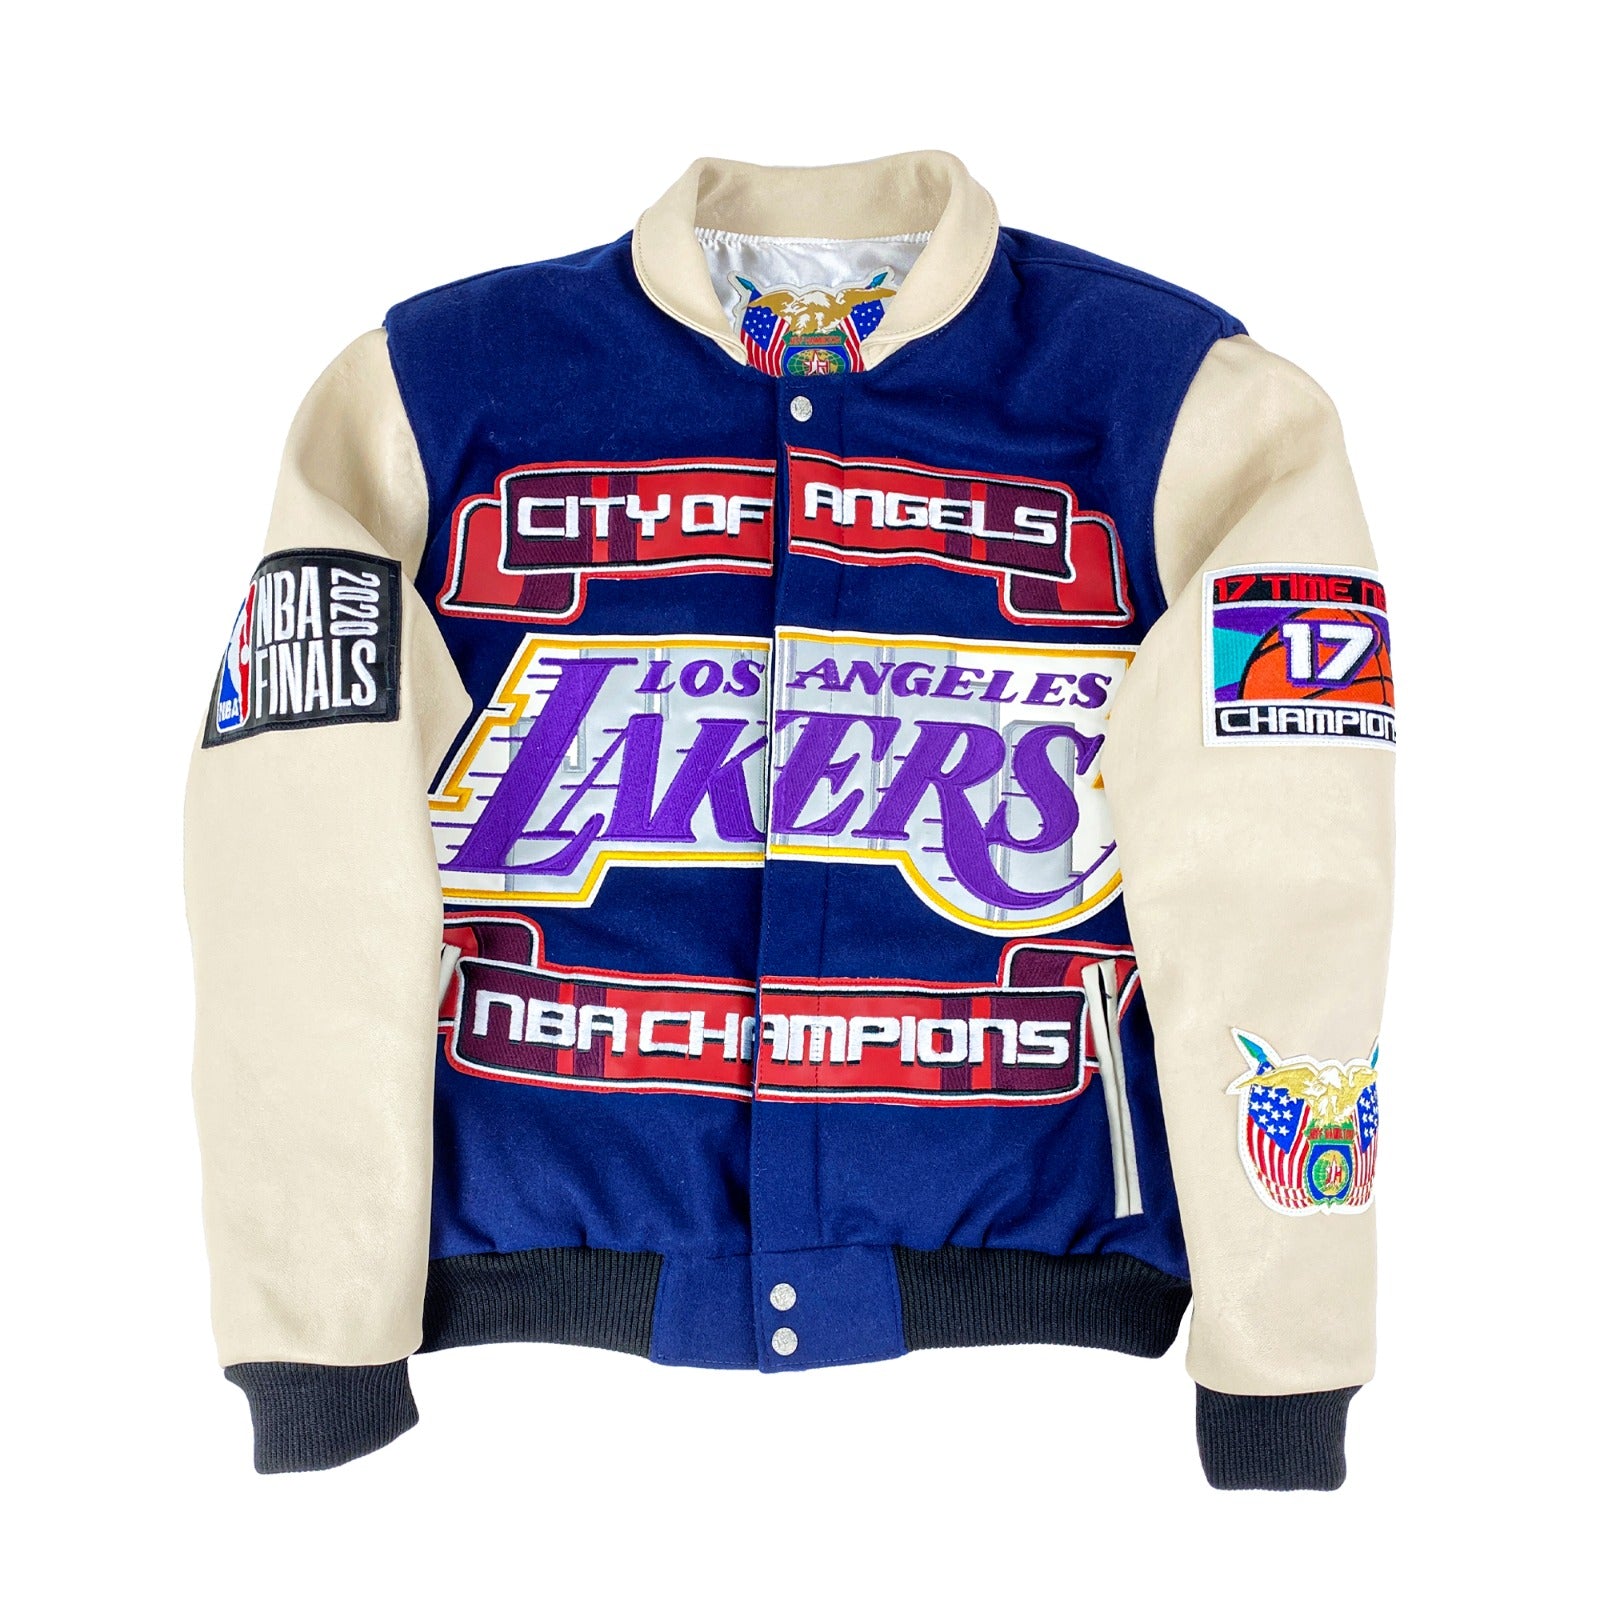 NBA Finals Los Angeles Lakers NBA Jackets for sale